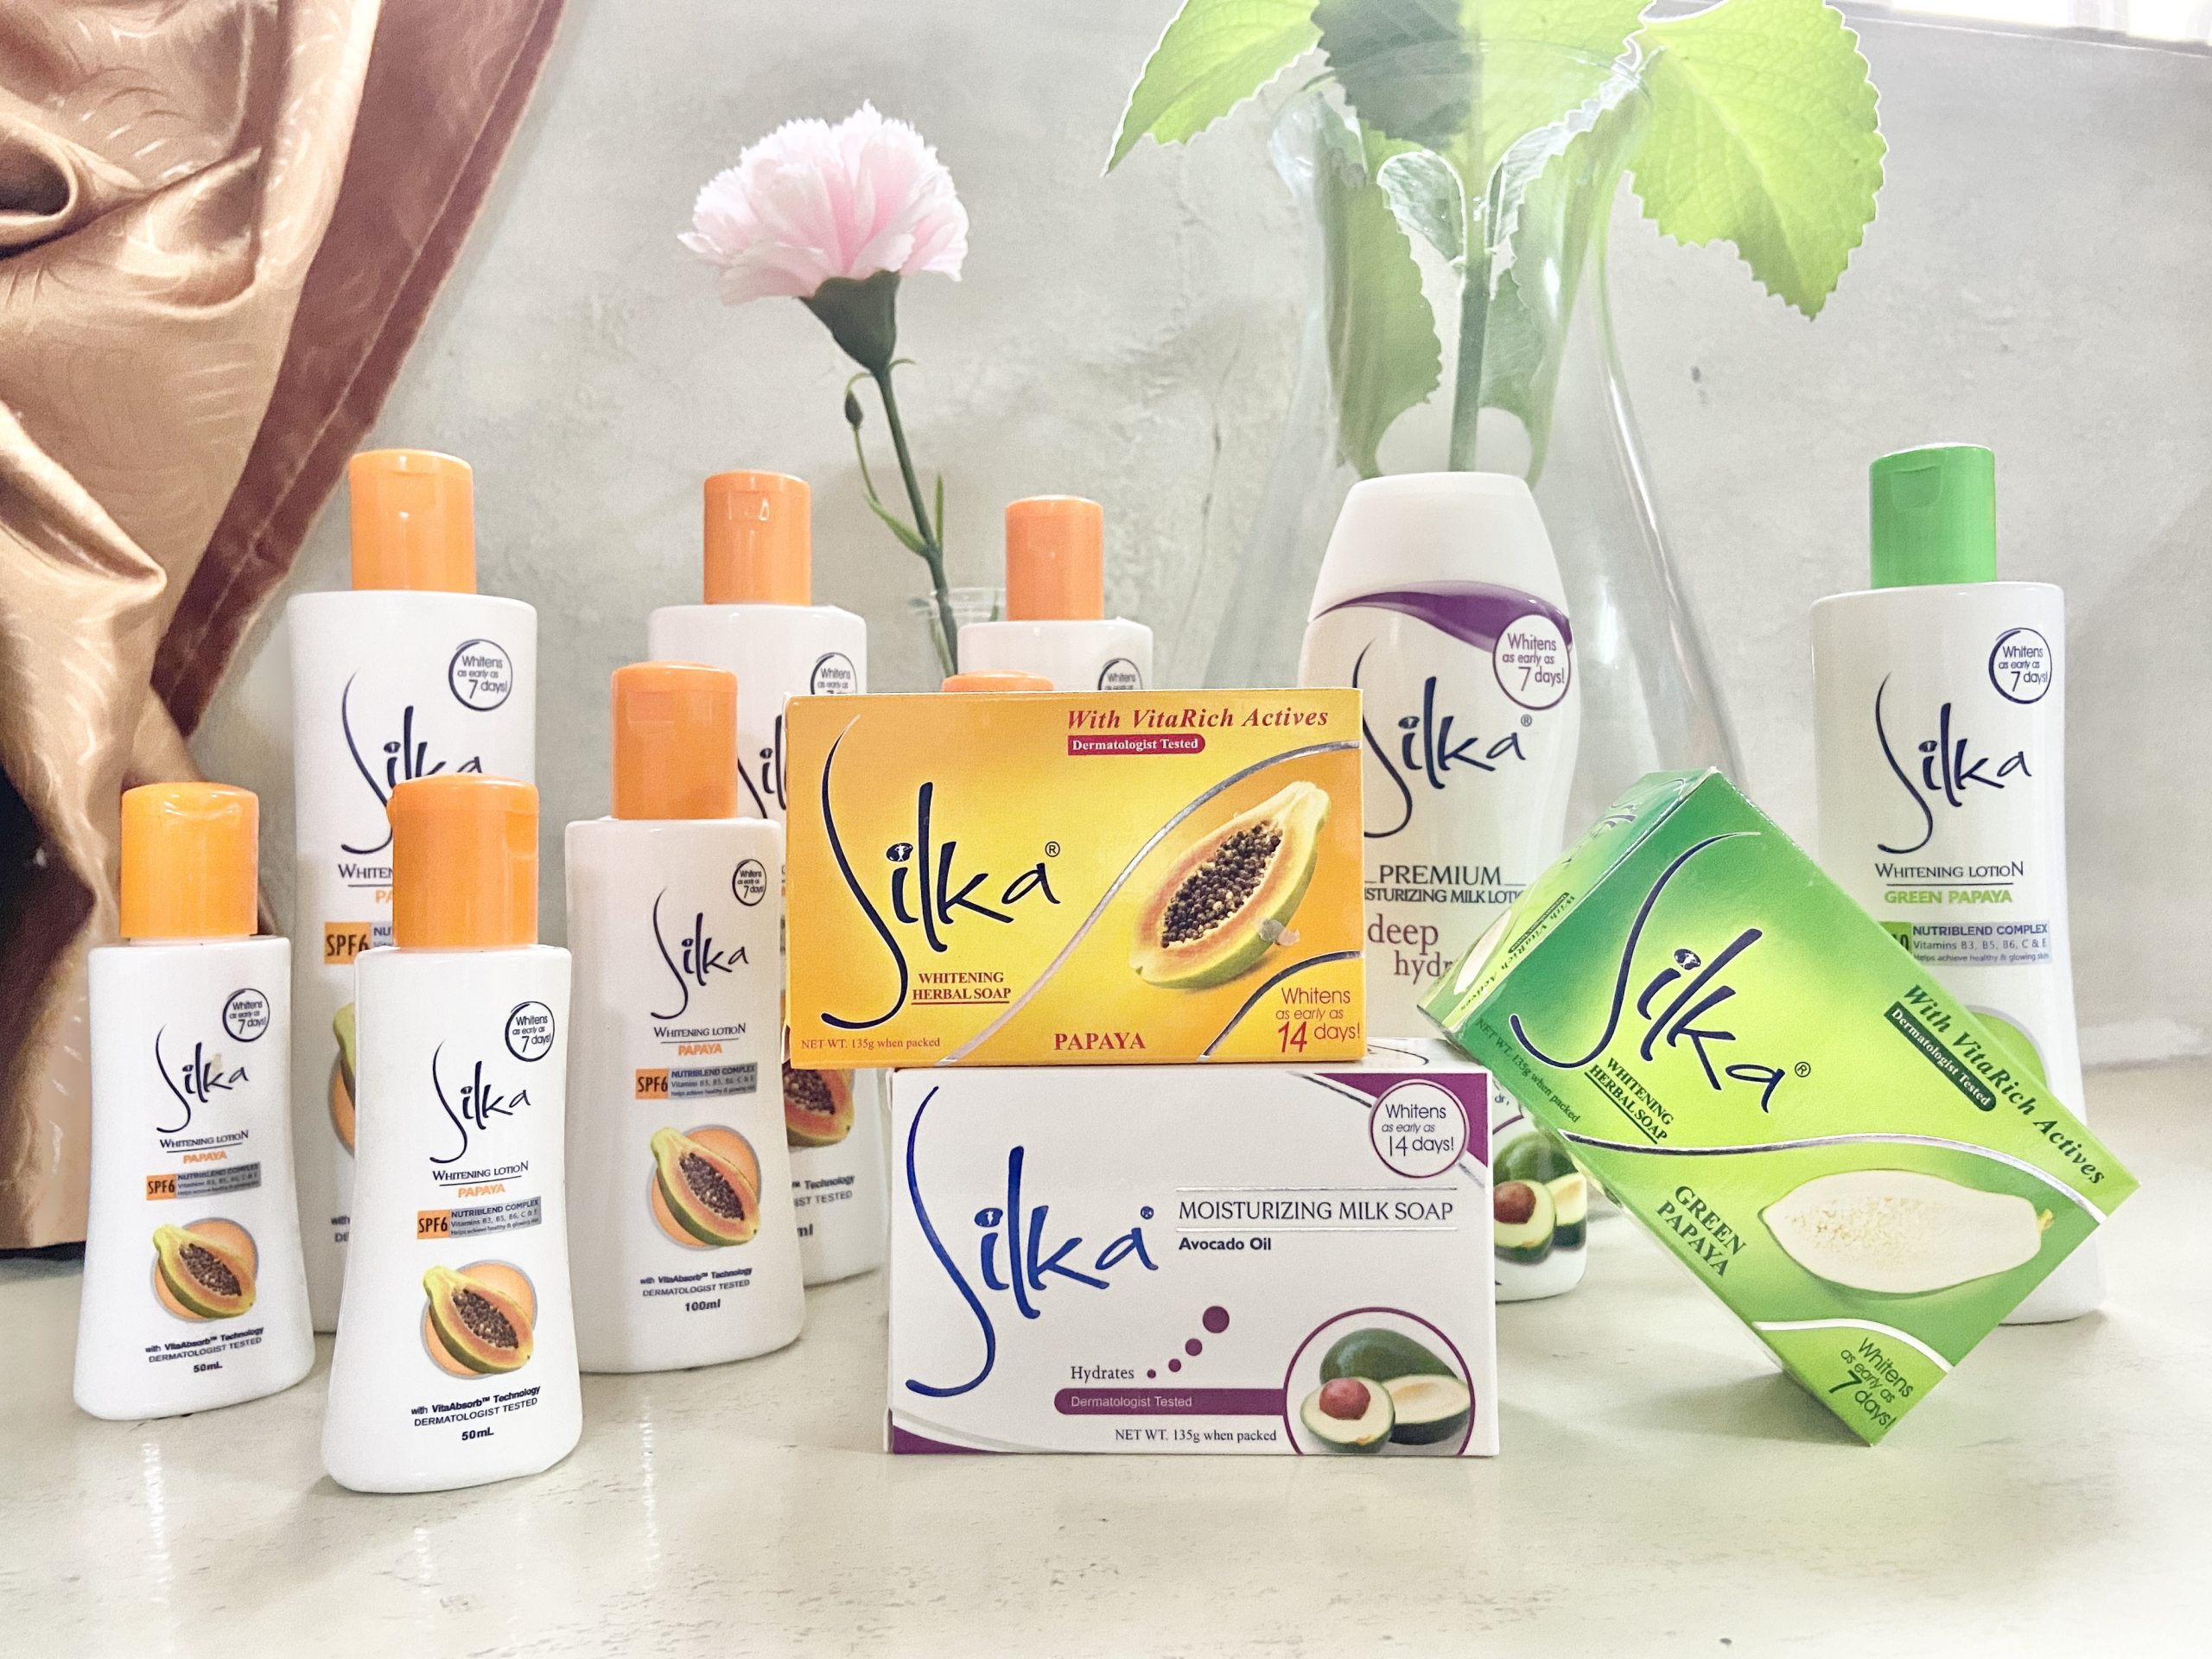 Shopee Features: Bagong Araw, Bagong Awra with Silka – up to 40% Off Today